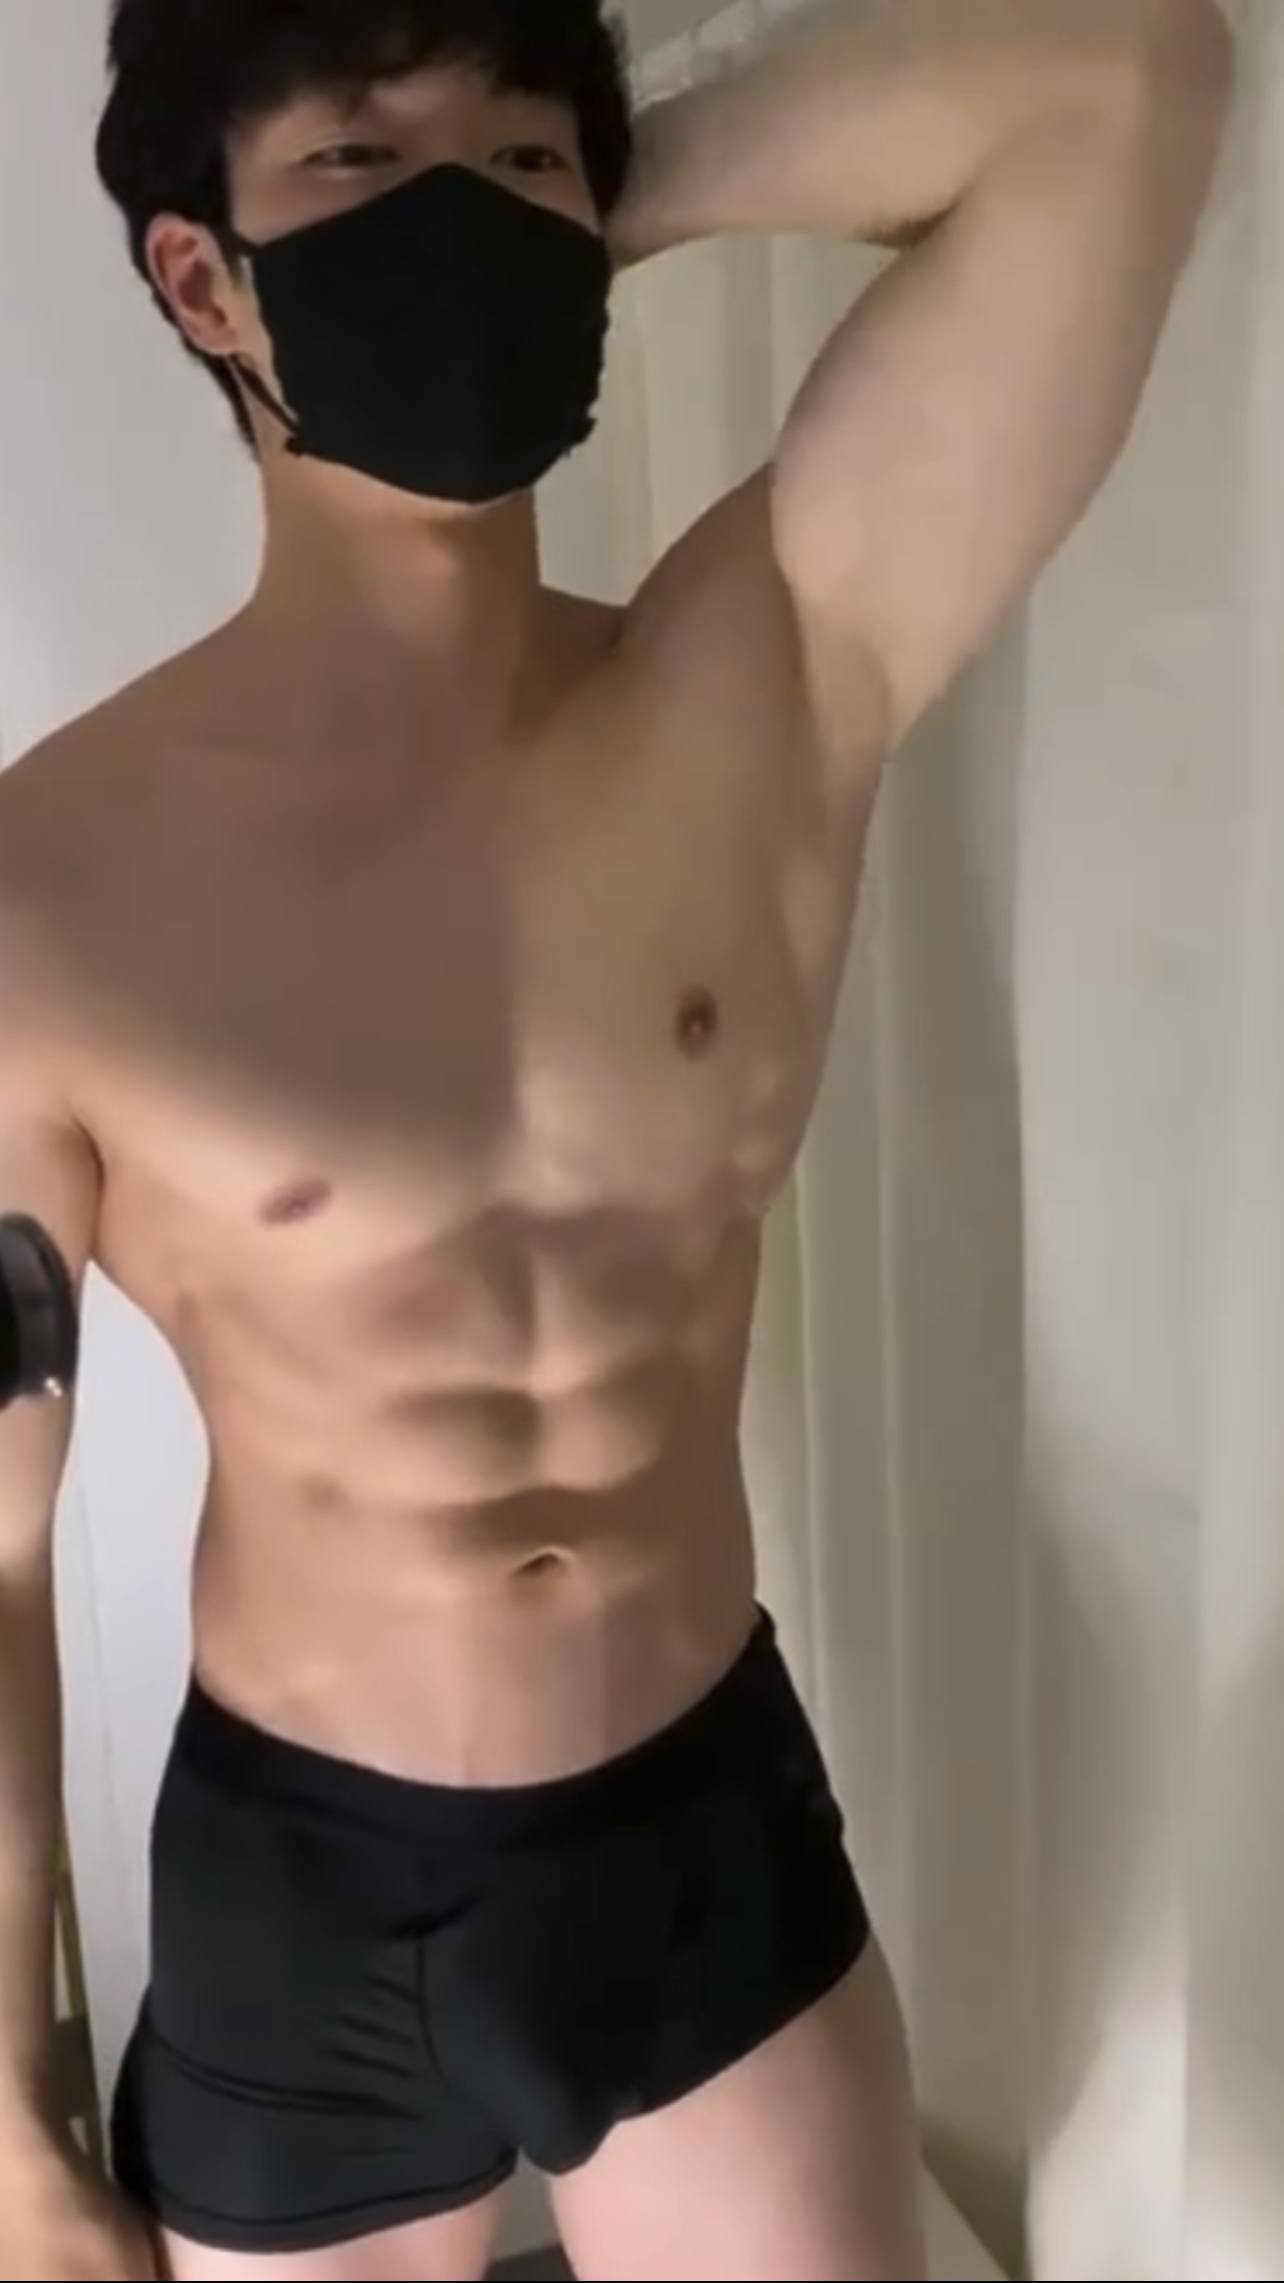 Cute asian guy shows off muscle